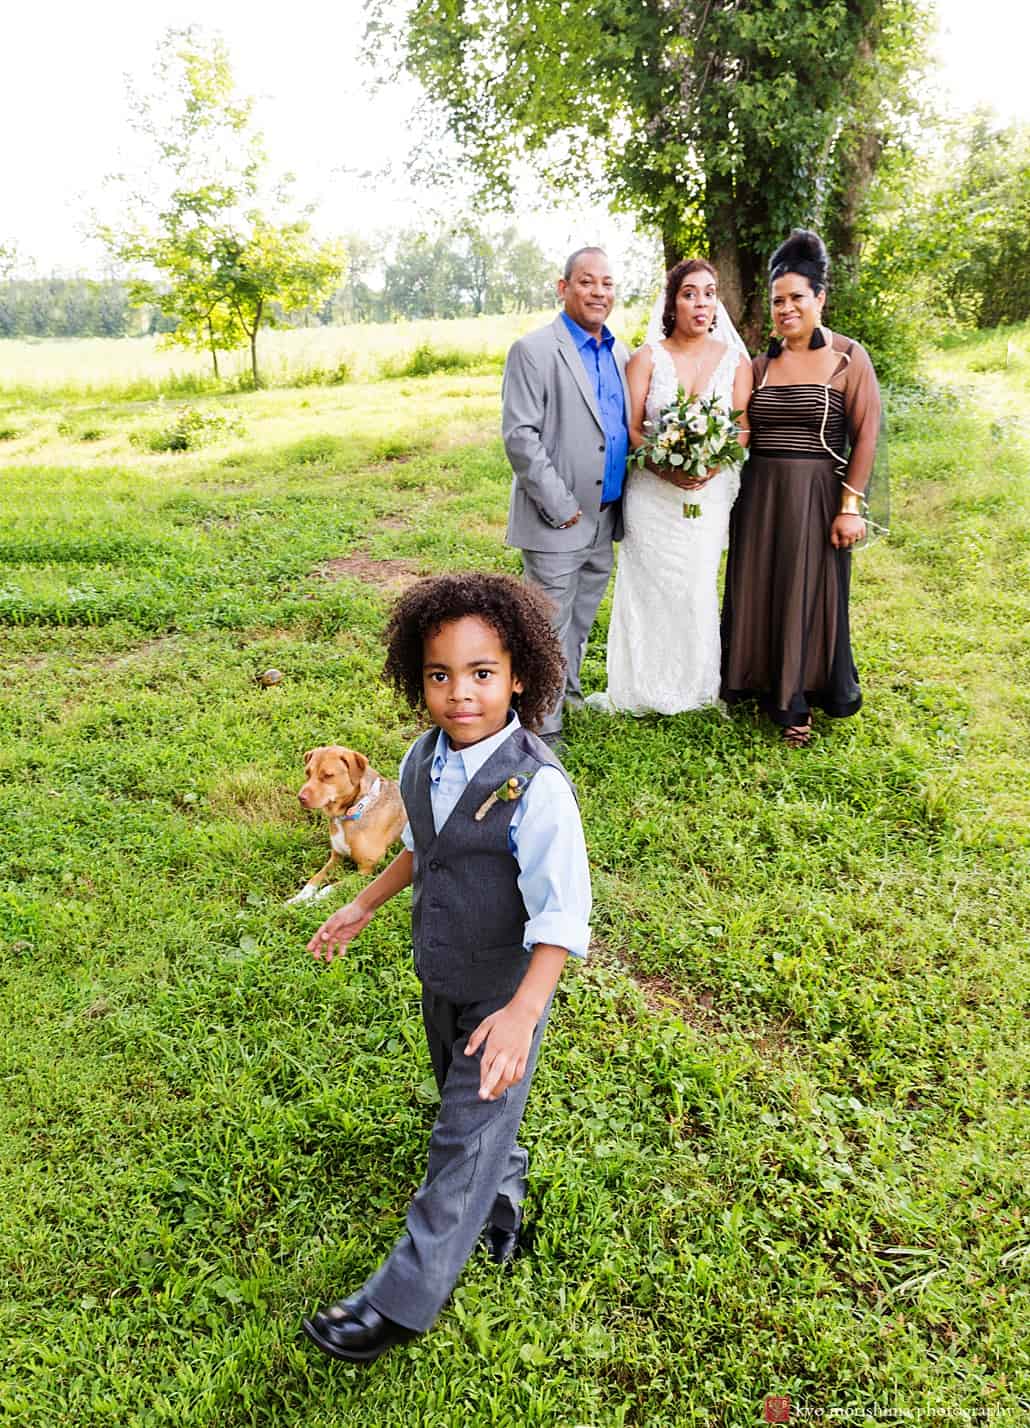 Little boy photo bombs during relaxed portrait session at Glenmoore Farm wedding in Hopewell, NJ